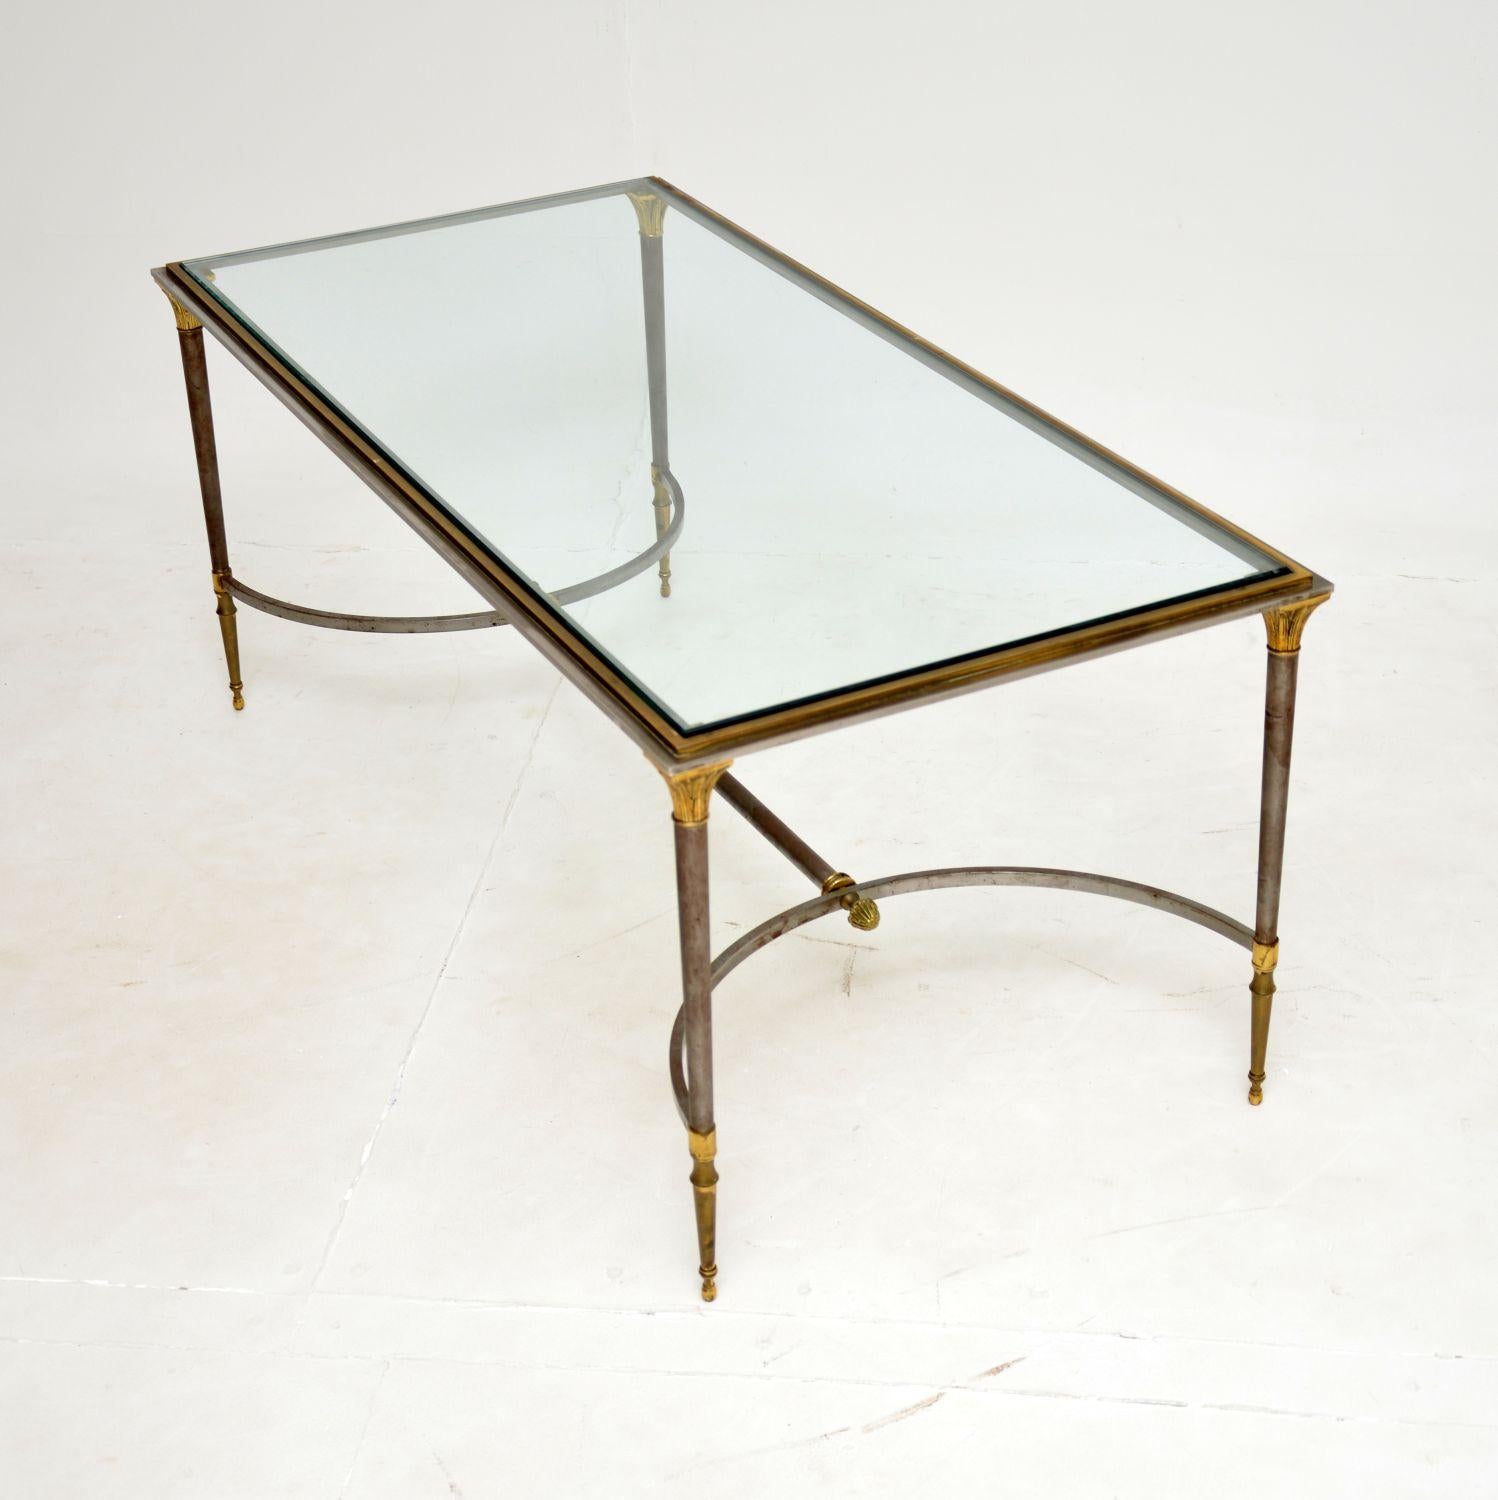 1970's Vintage French Steel & Brass Coffee Table In Good Condition For Sale In London, GB